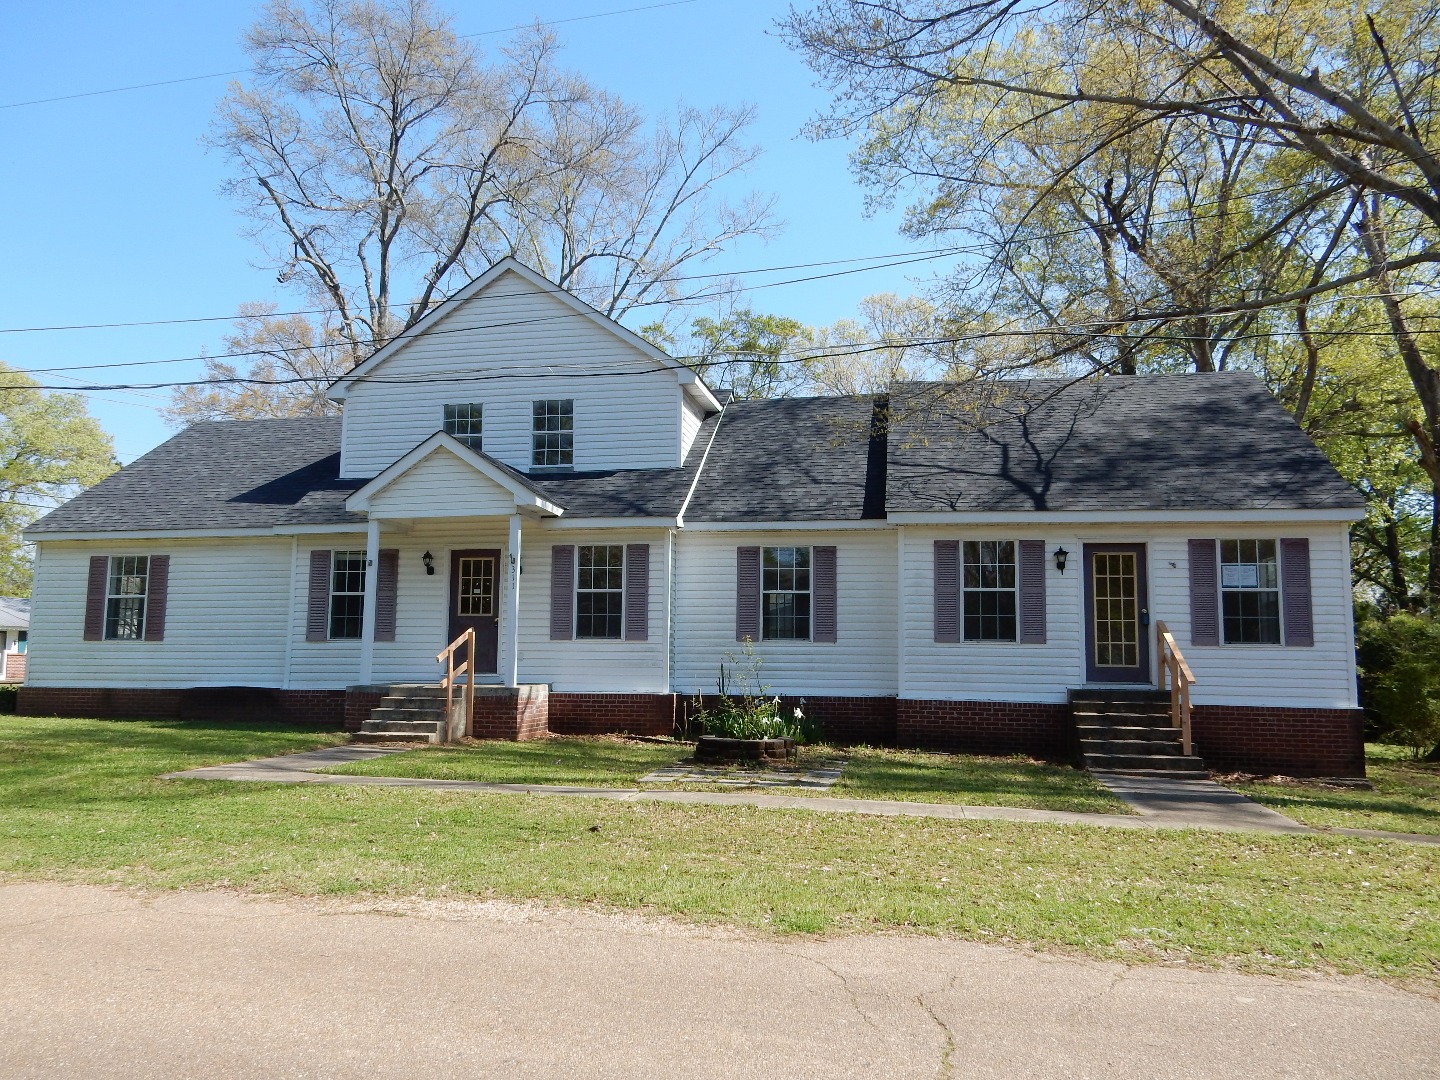 311 East Court StRaymond, MS, 39154Hinds County